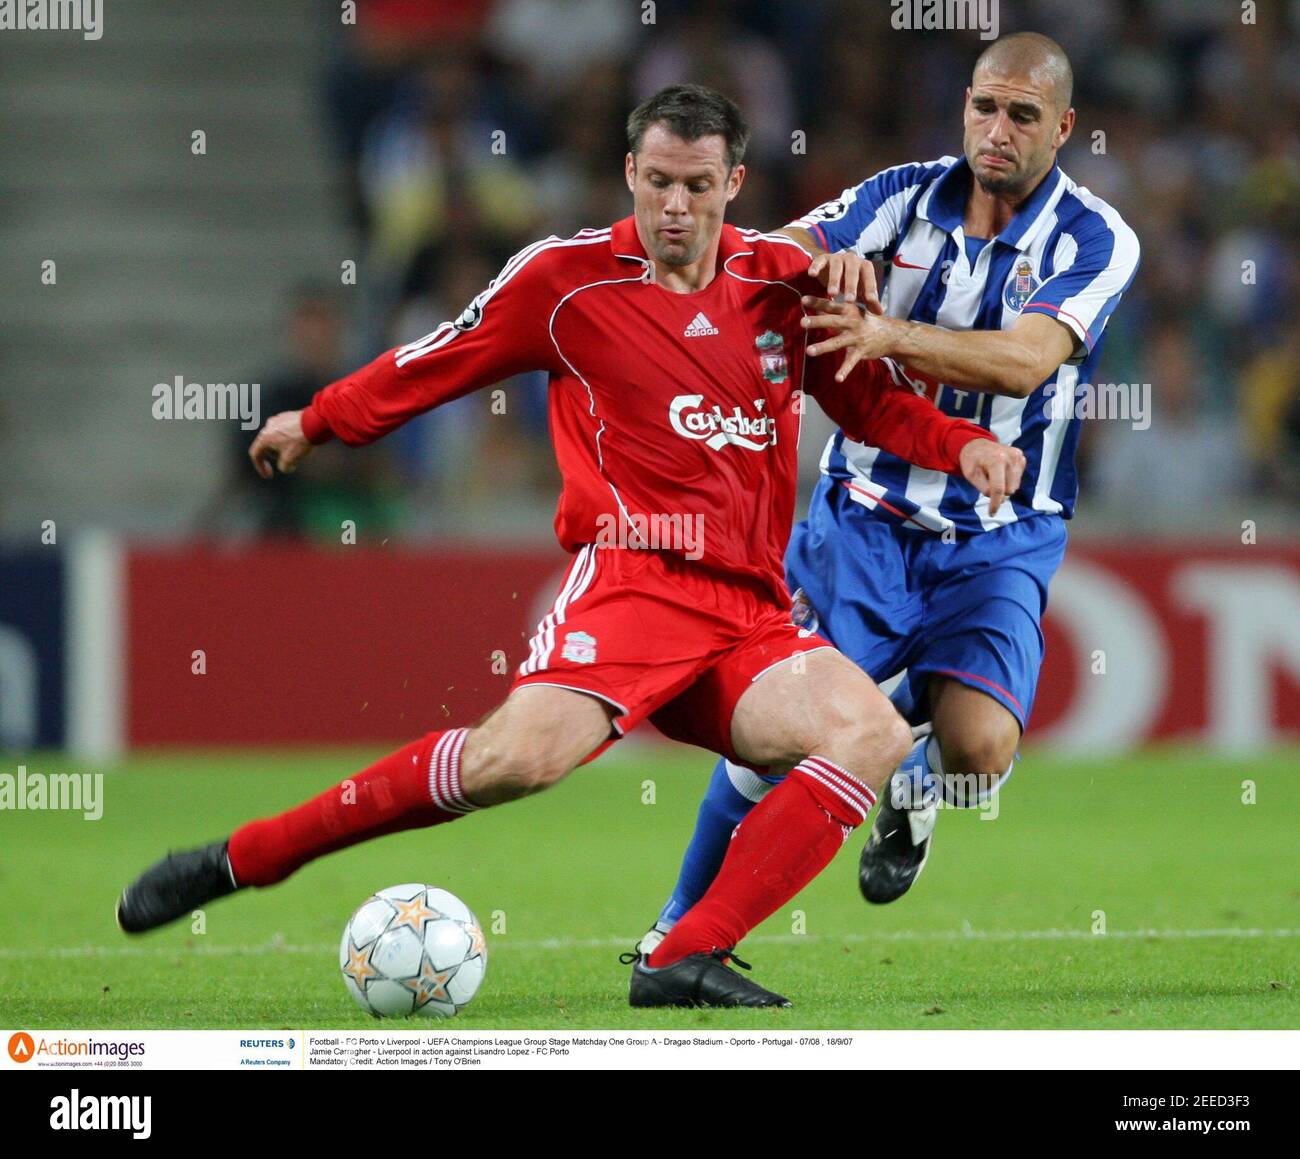 Football - FC Porto v Liverpool - UEFA Champions League Group Stage  Matchday One Group A - Dragao Stadium - Oporto - Portugal - 07/08 , 18/9/07  Jamie Carragher - Liverpool in